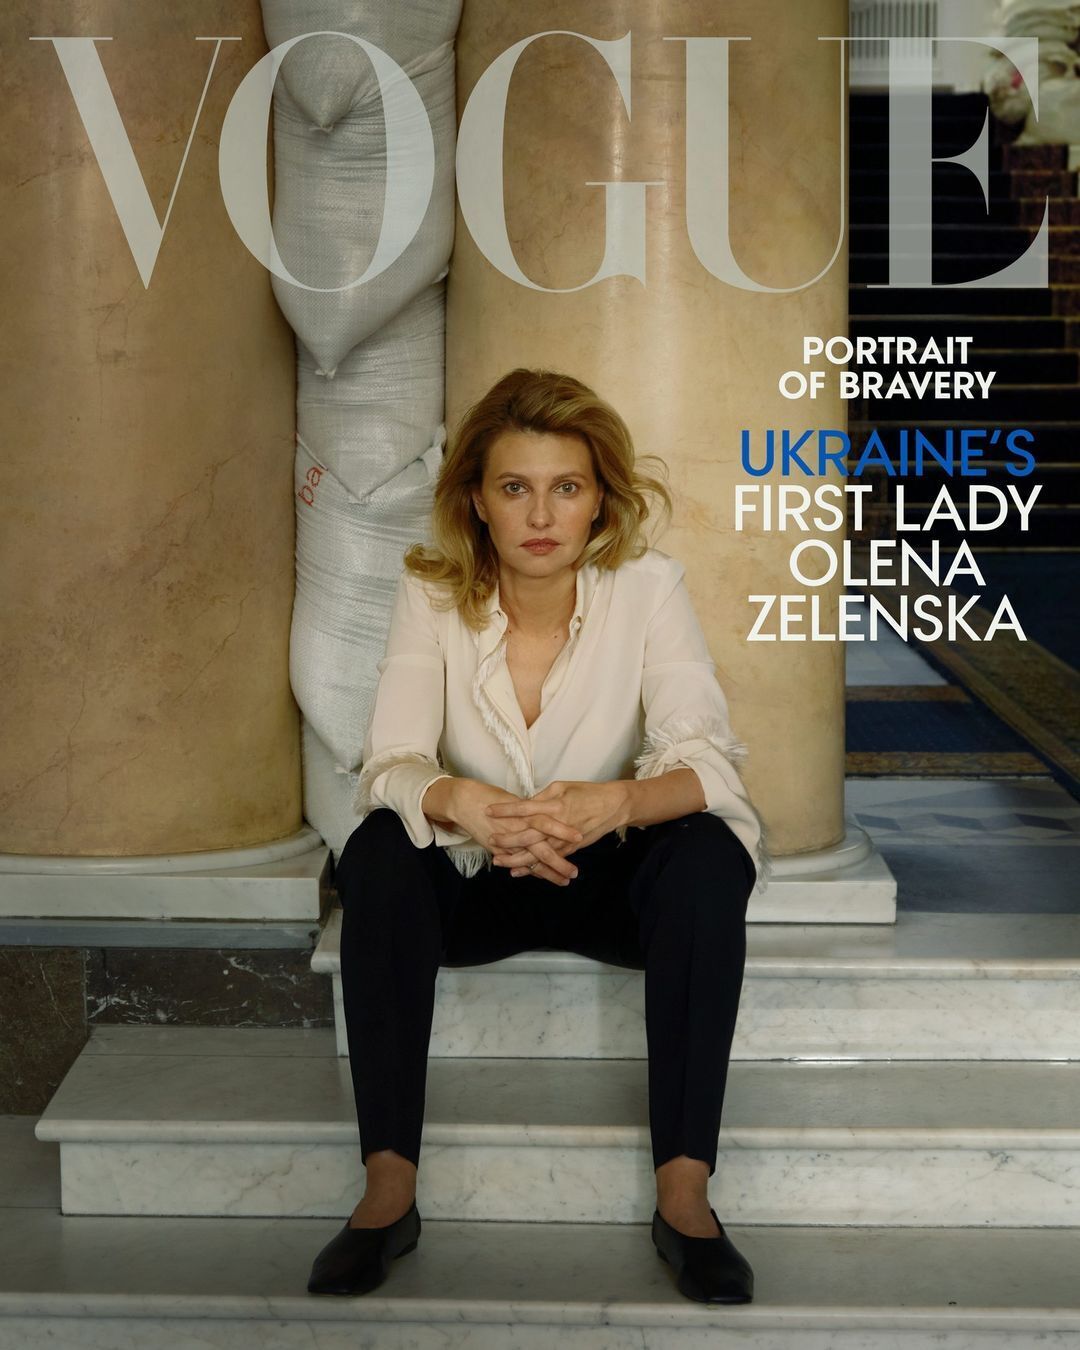 ''Earnings go for food and housing''. Star photographer – about Zelensky's photo shoot for Vogue, Podkopaeva's iconic words and how she traded the USA for a village in Ukraine